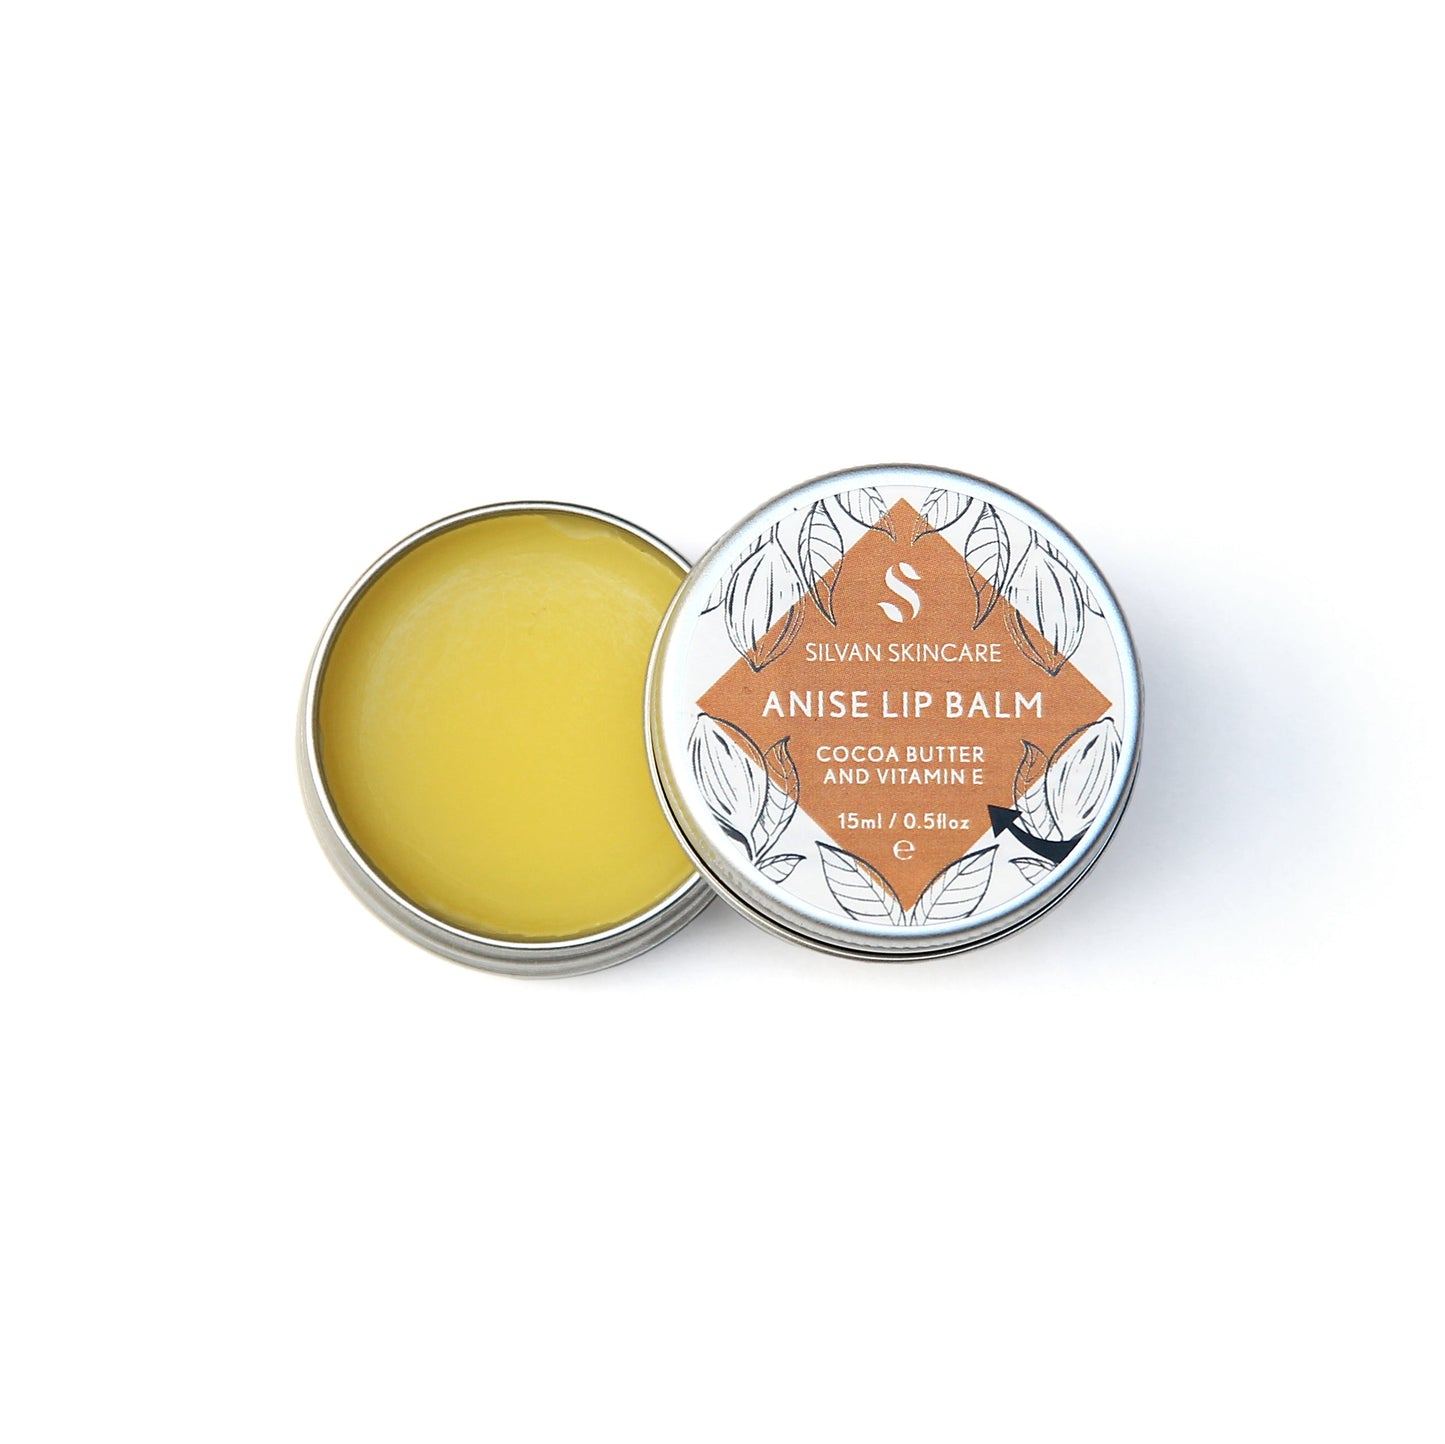 Single aluminium tin of the Silvan Skincare anise lip balm. The pot in open, showing the yellow balm inside and the lid is beside it showing the white and dark orange label